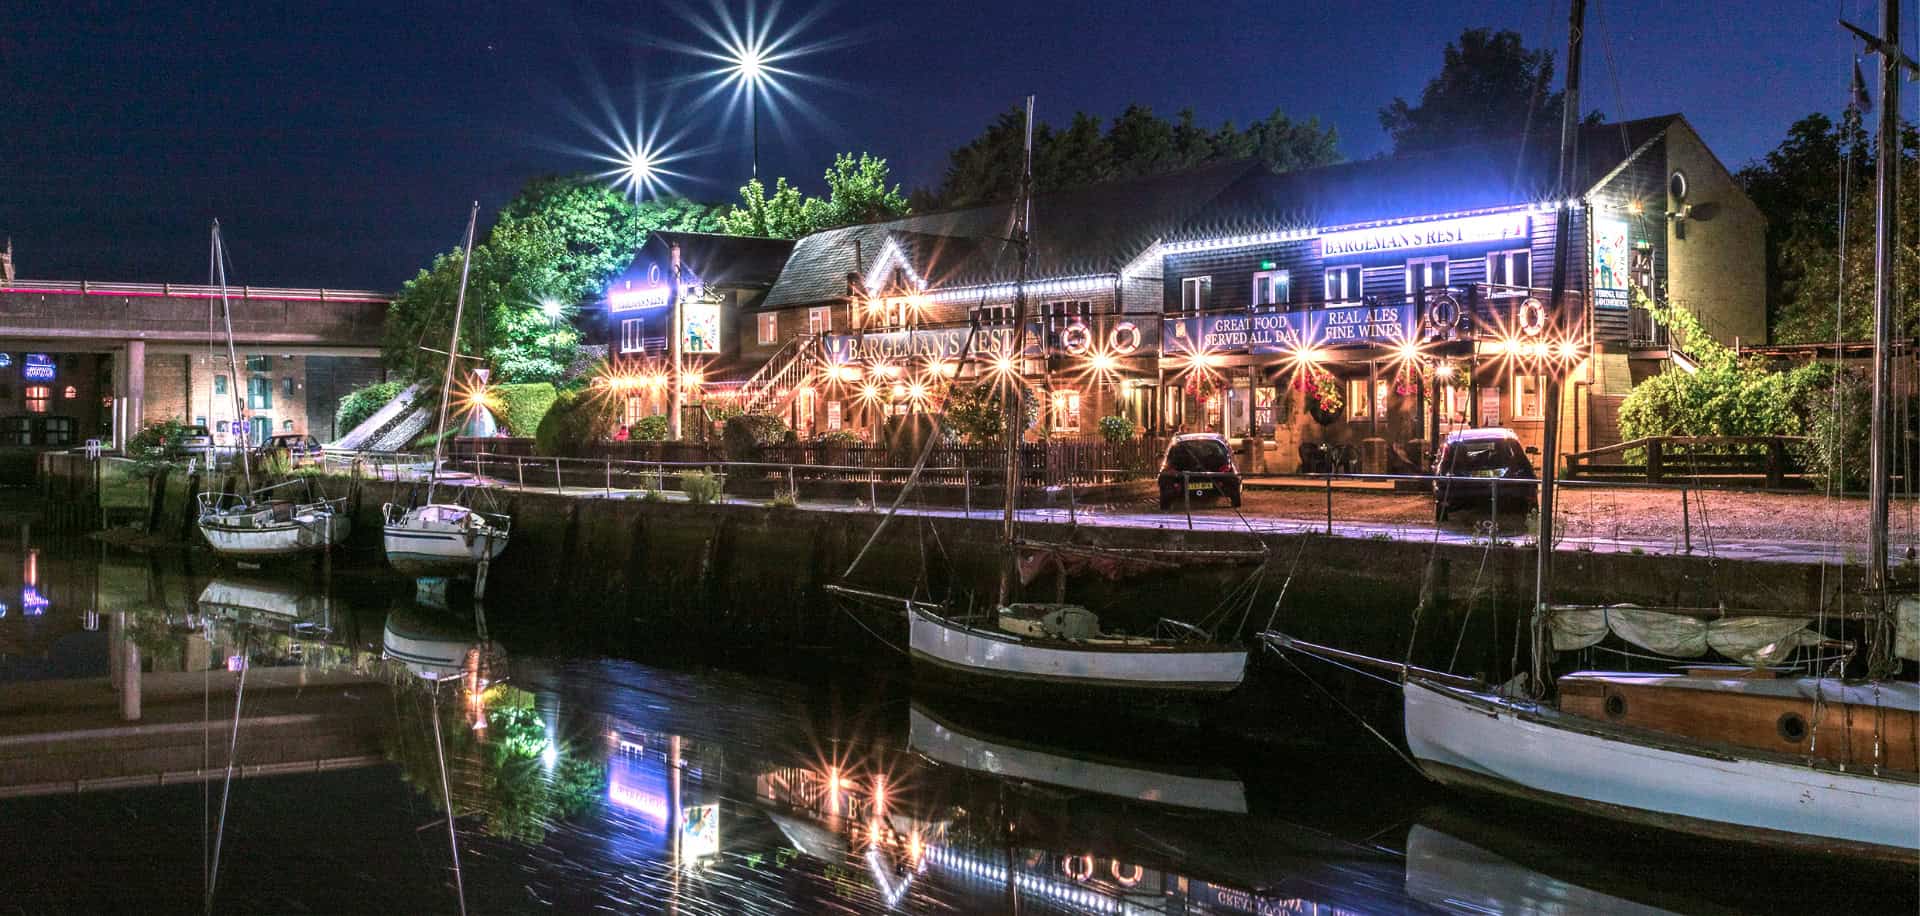 The Bargemans Rest at night